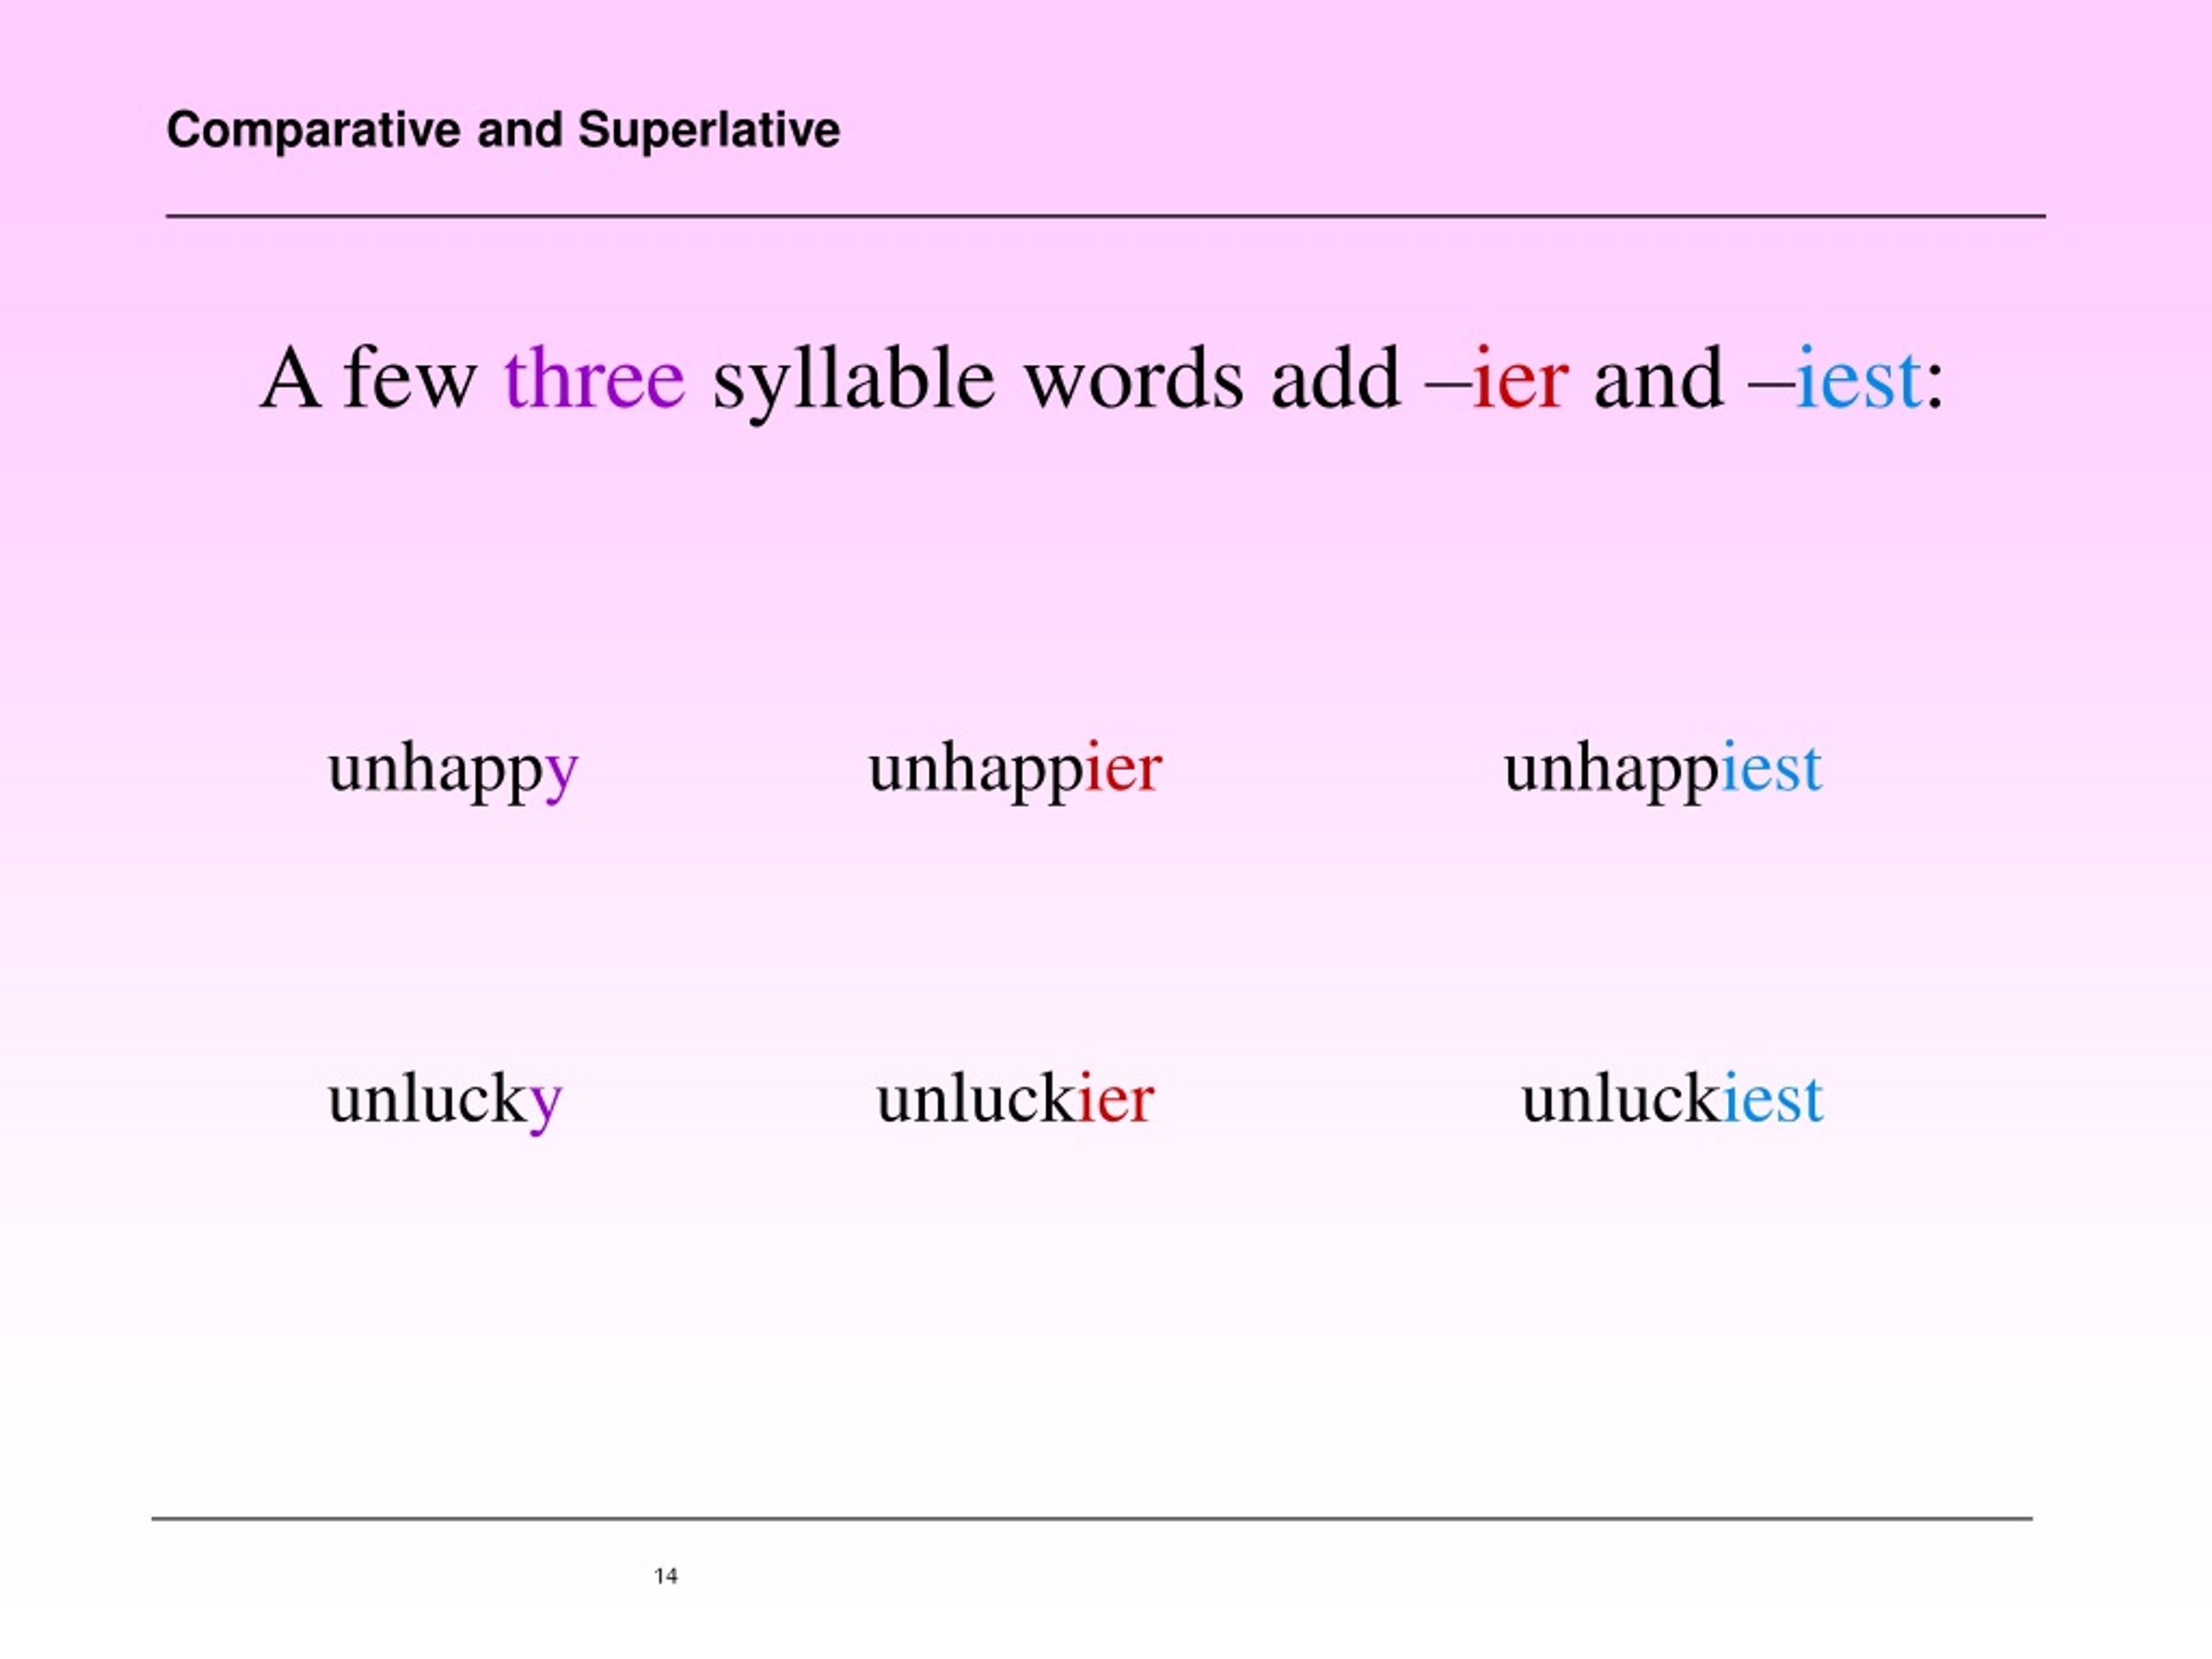 Hot comparative and superlative. Comparatives and Superlatives. Предложения Comparative and Superlative. Few Comparative and Superlative. Comparative and Superlatives упражнения 3 syllables.